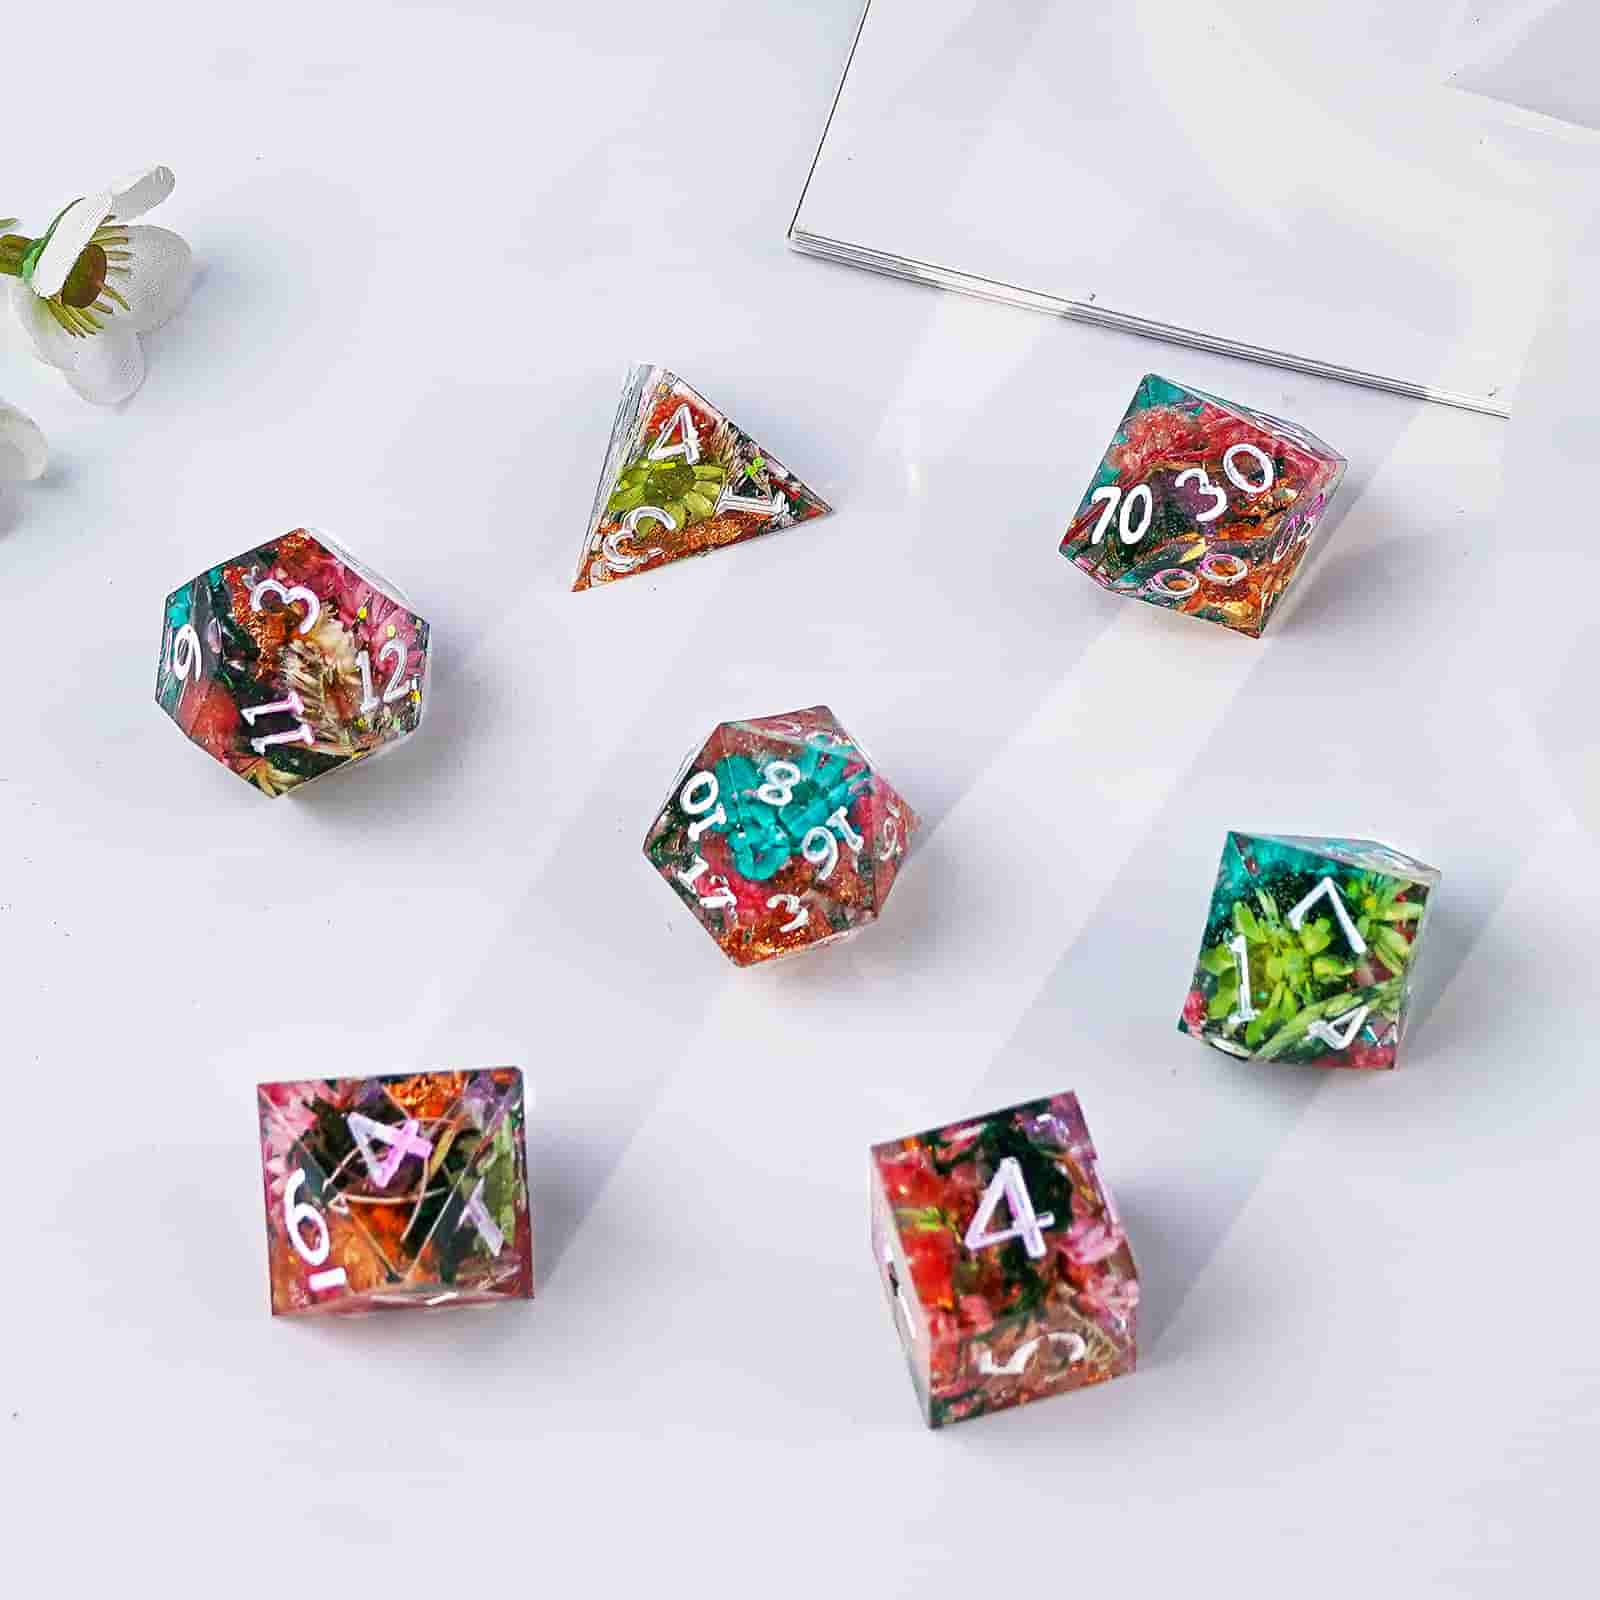 Let's Resin Polyhedral Dice Mold Set - 7 Pcs